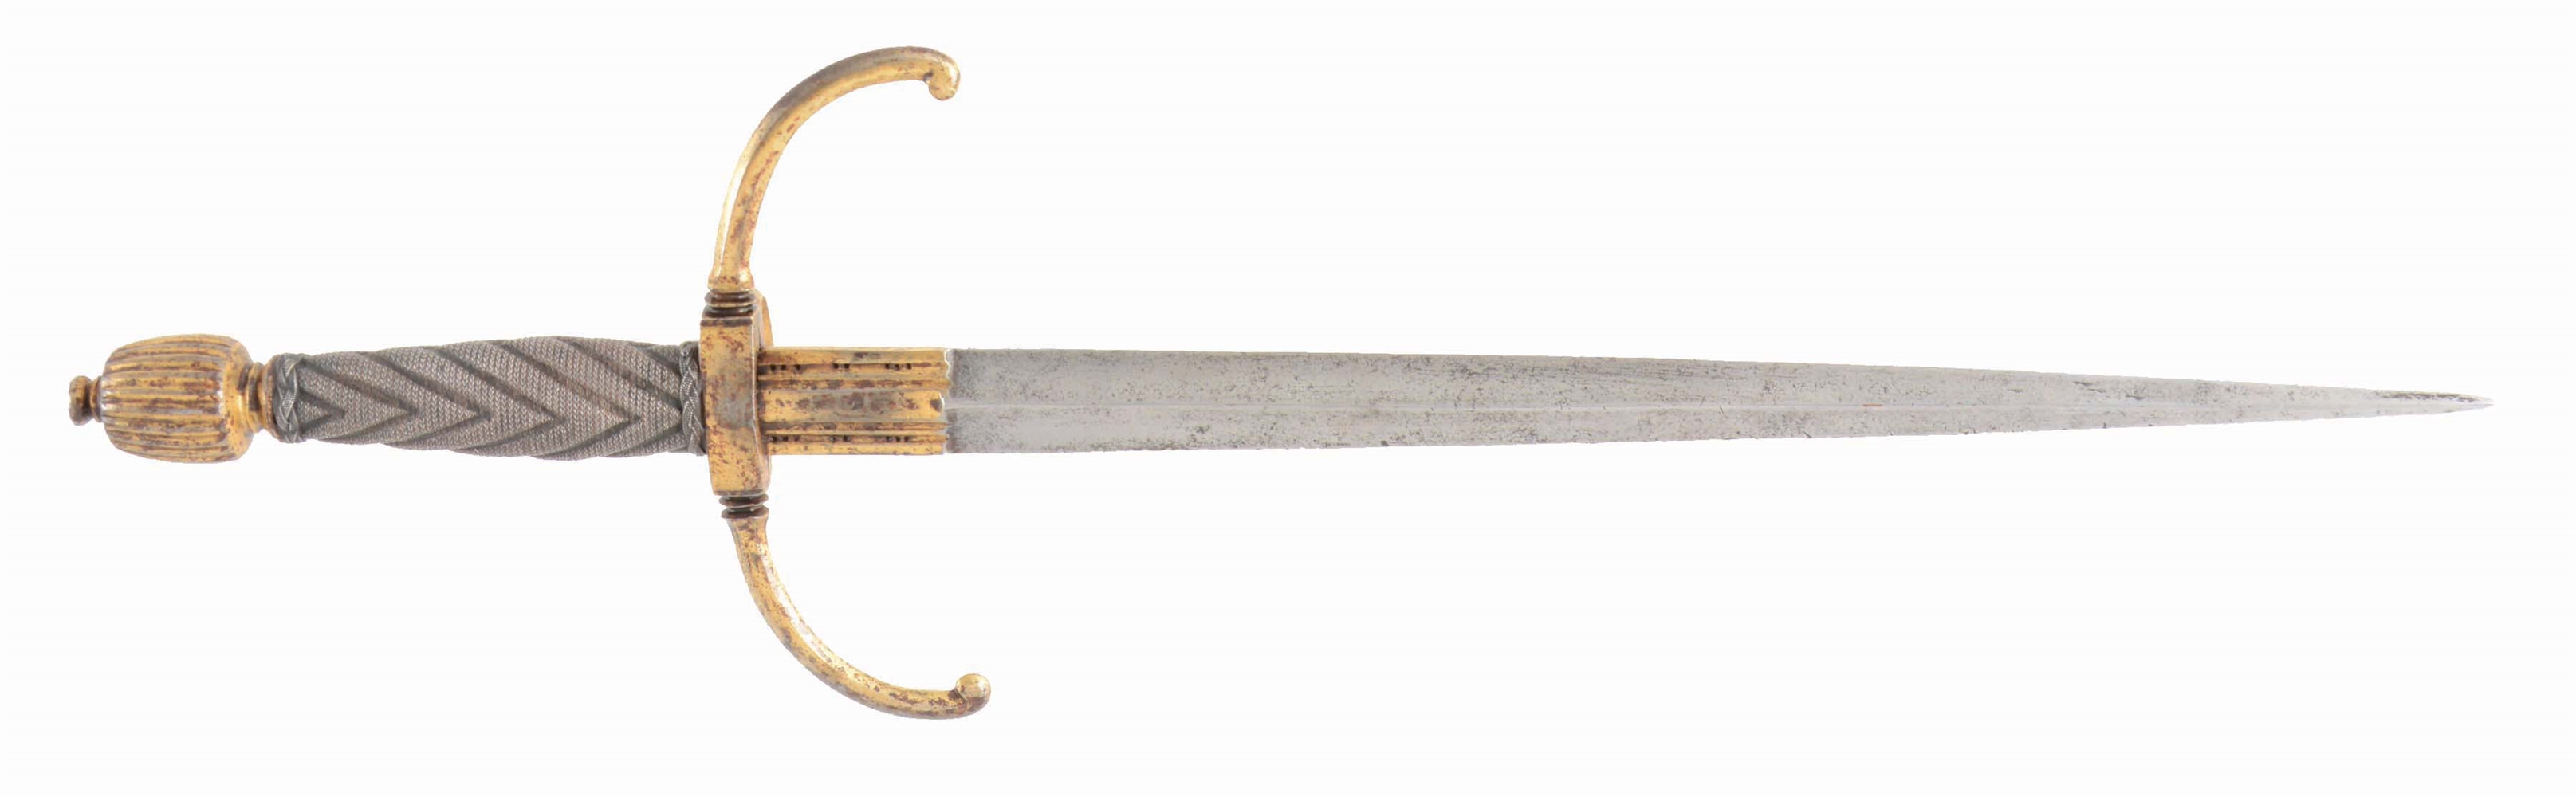 A GOOD LEFT HAND OR QUILLON DAGGER, LAST QUARTER OF THE 16TH CENTURY WITH STOUT BLADE AND GILDED POMMEL AND GUARD.